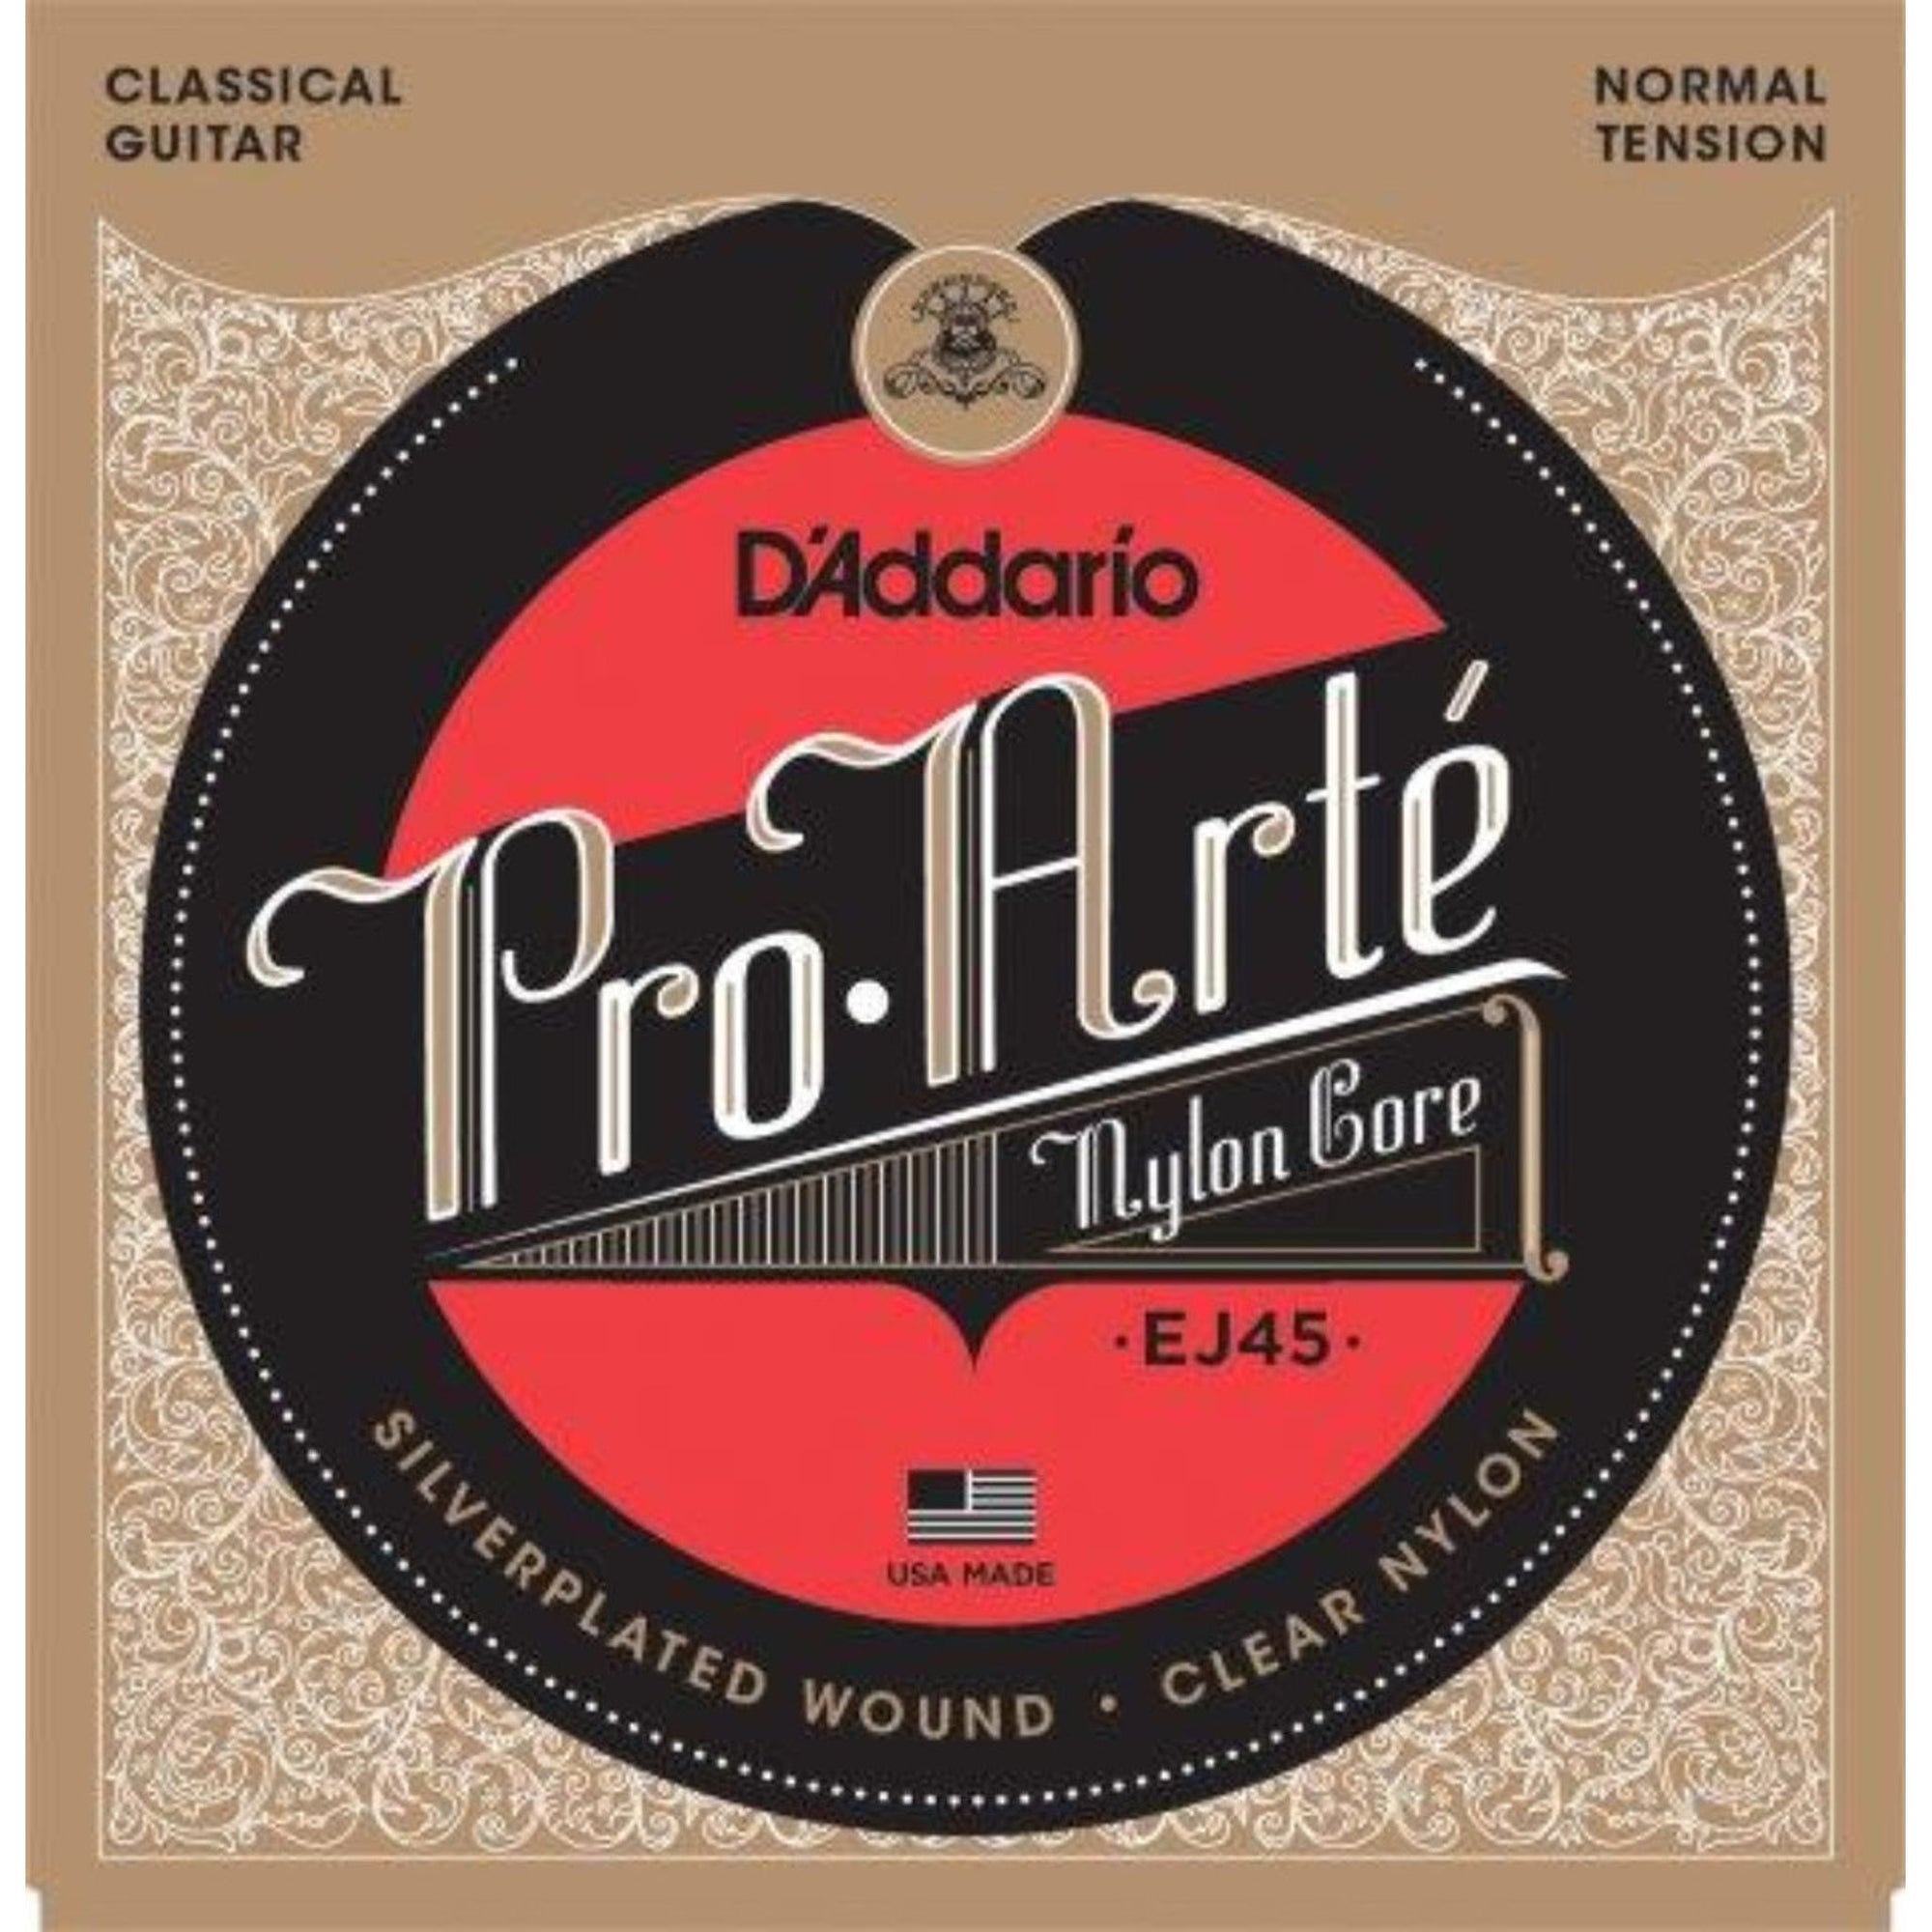 EJ45, normal tension, is D'Addario's best selling classical set, preferred for its balance of rich tone, comfortable feel and dynamic projection.